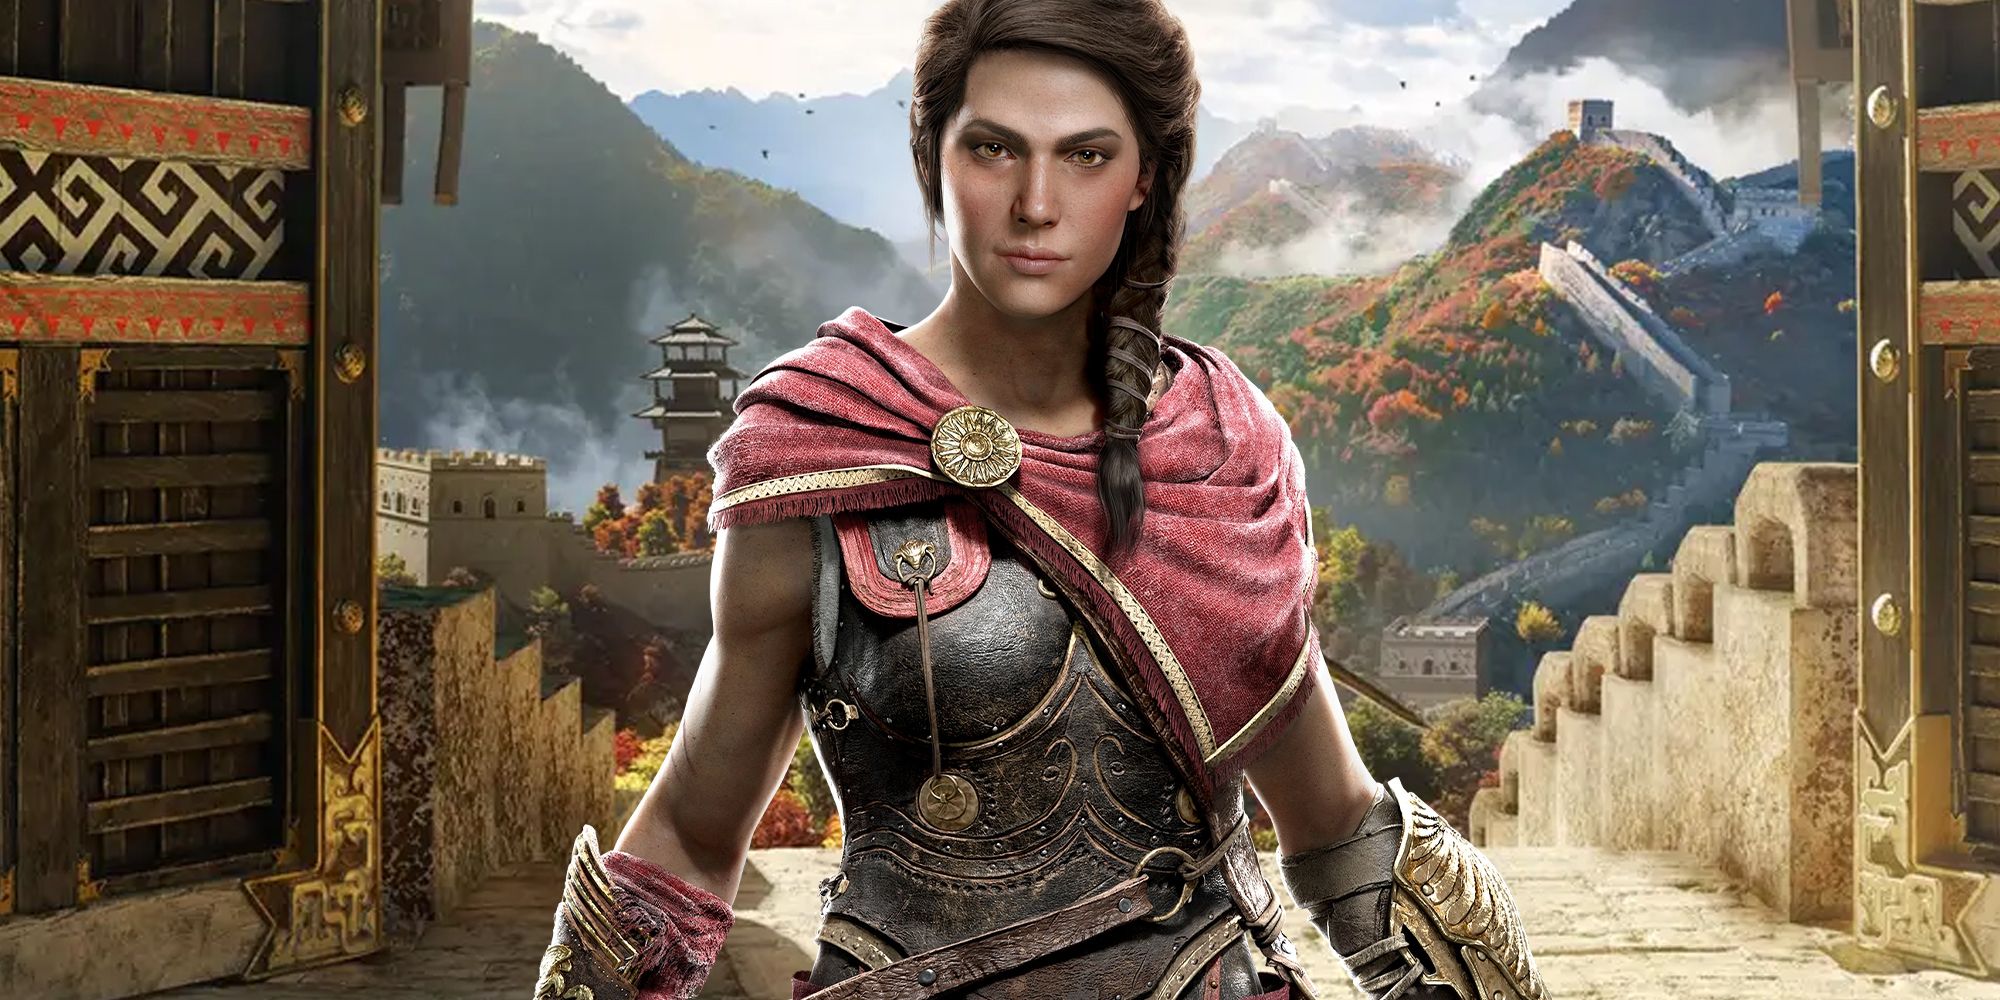 Assassins Creed Jade key art with Kassandra from Odyssey on top